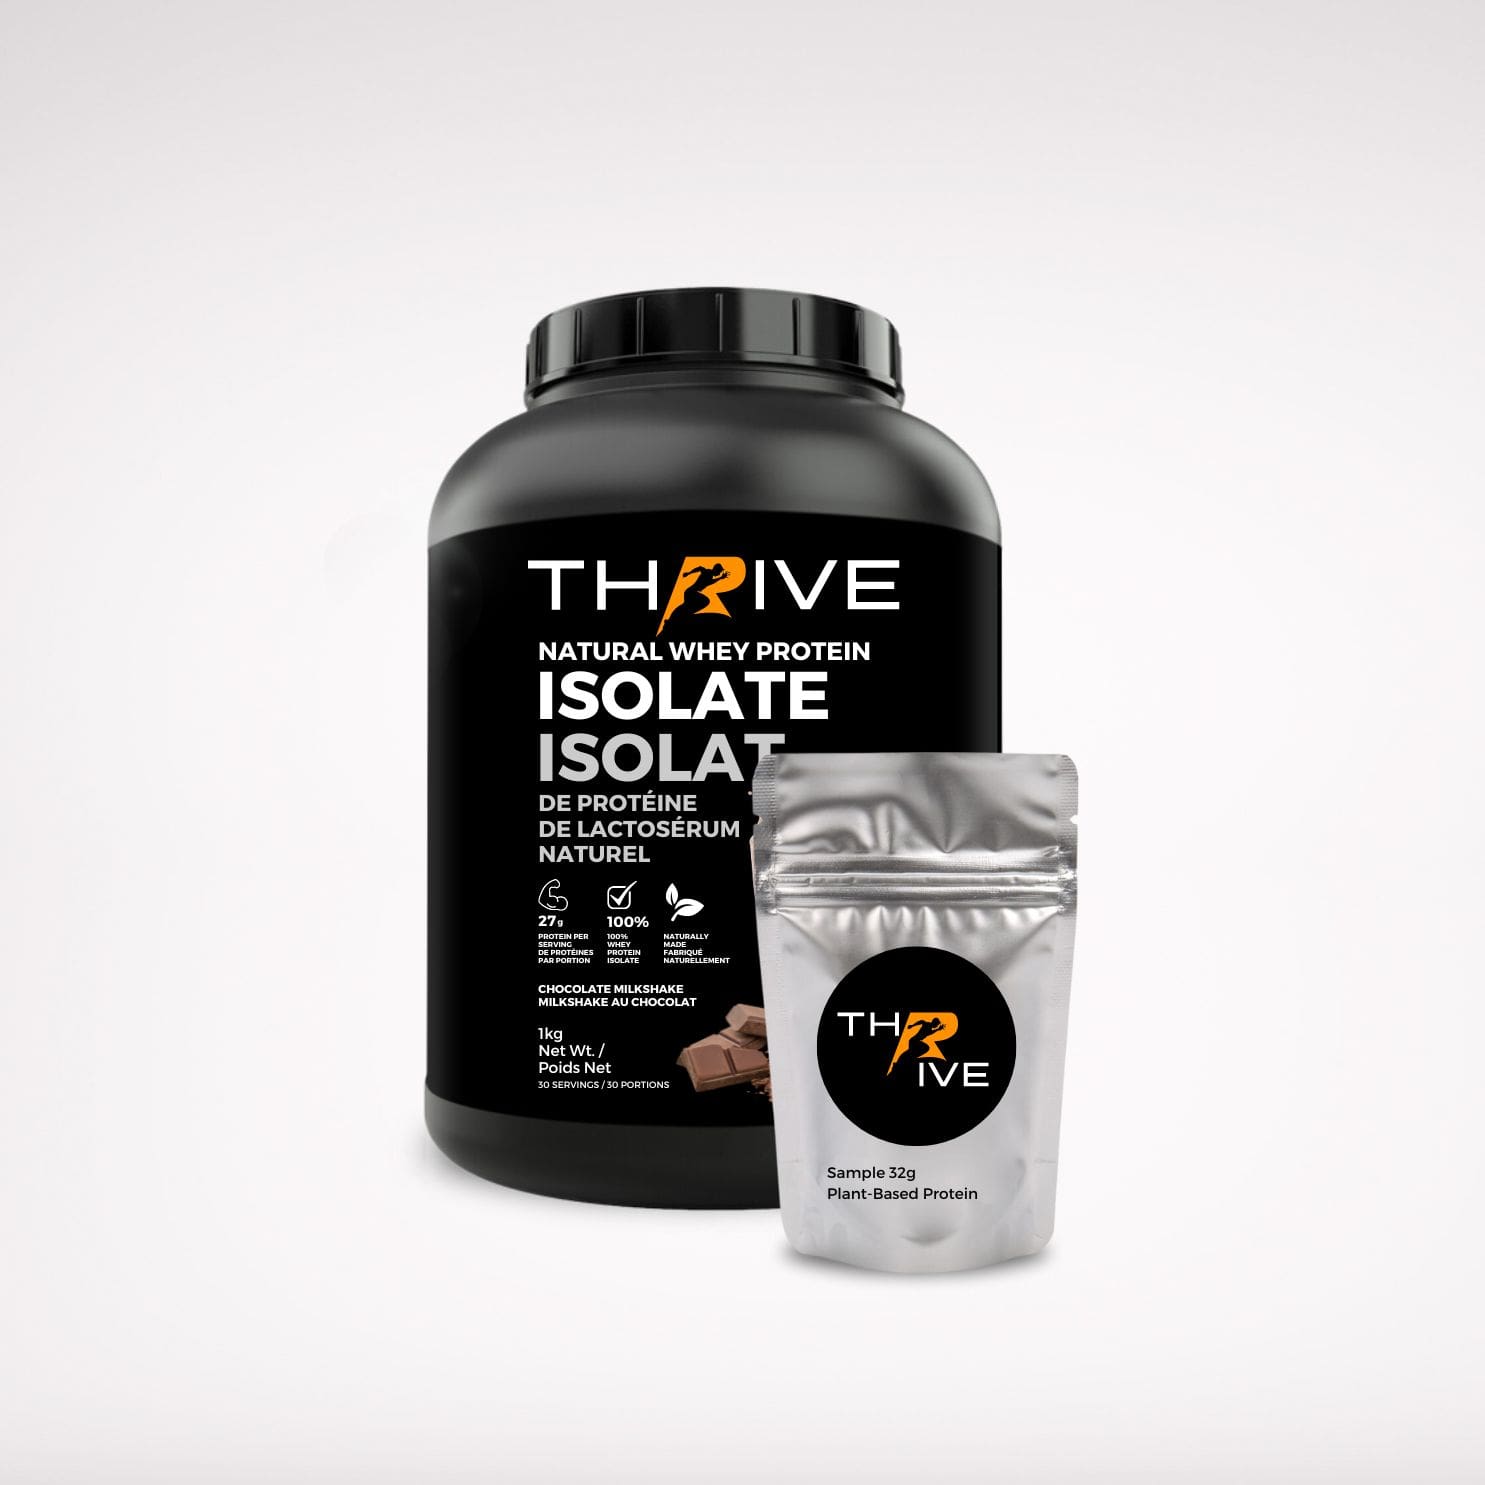 Thrive Natural Whey Protein Isolate Sample (Chocolate)